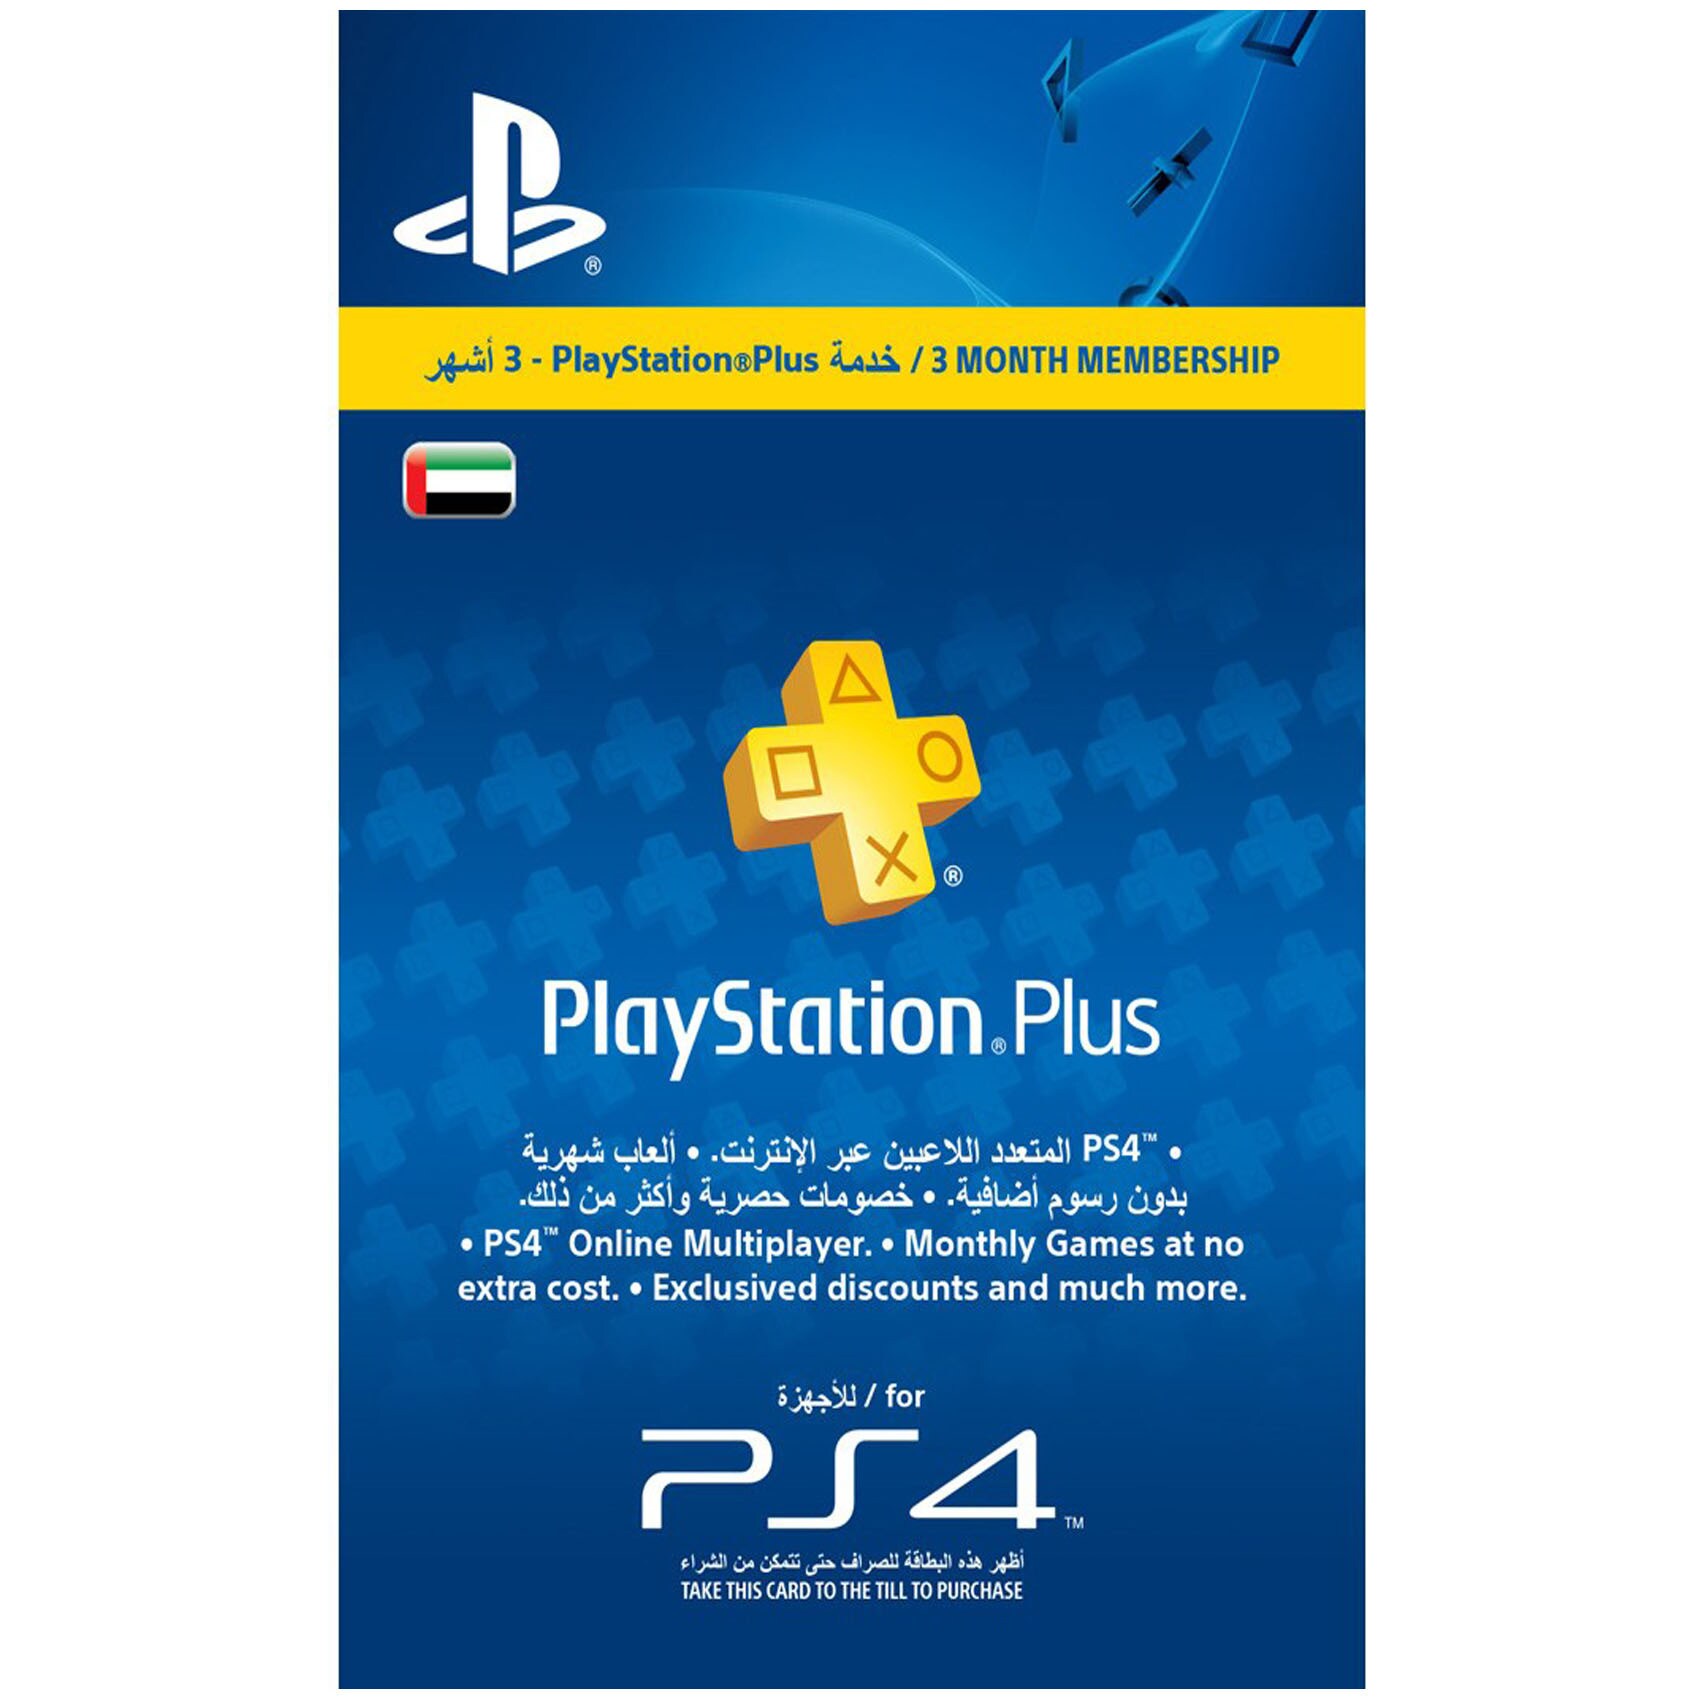 shop to playstation plus